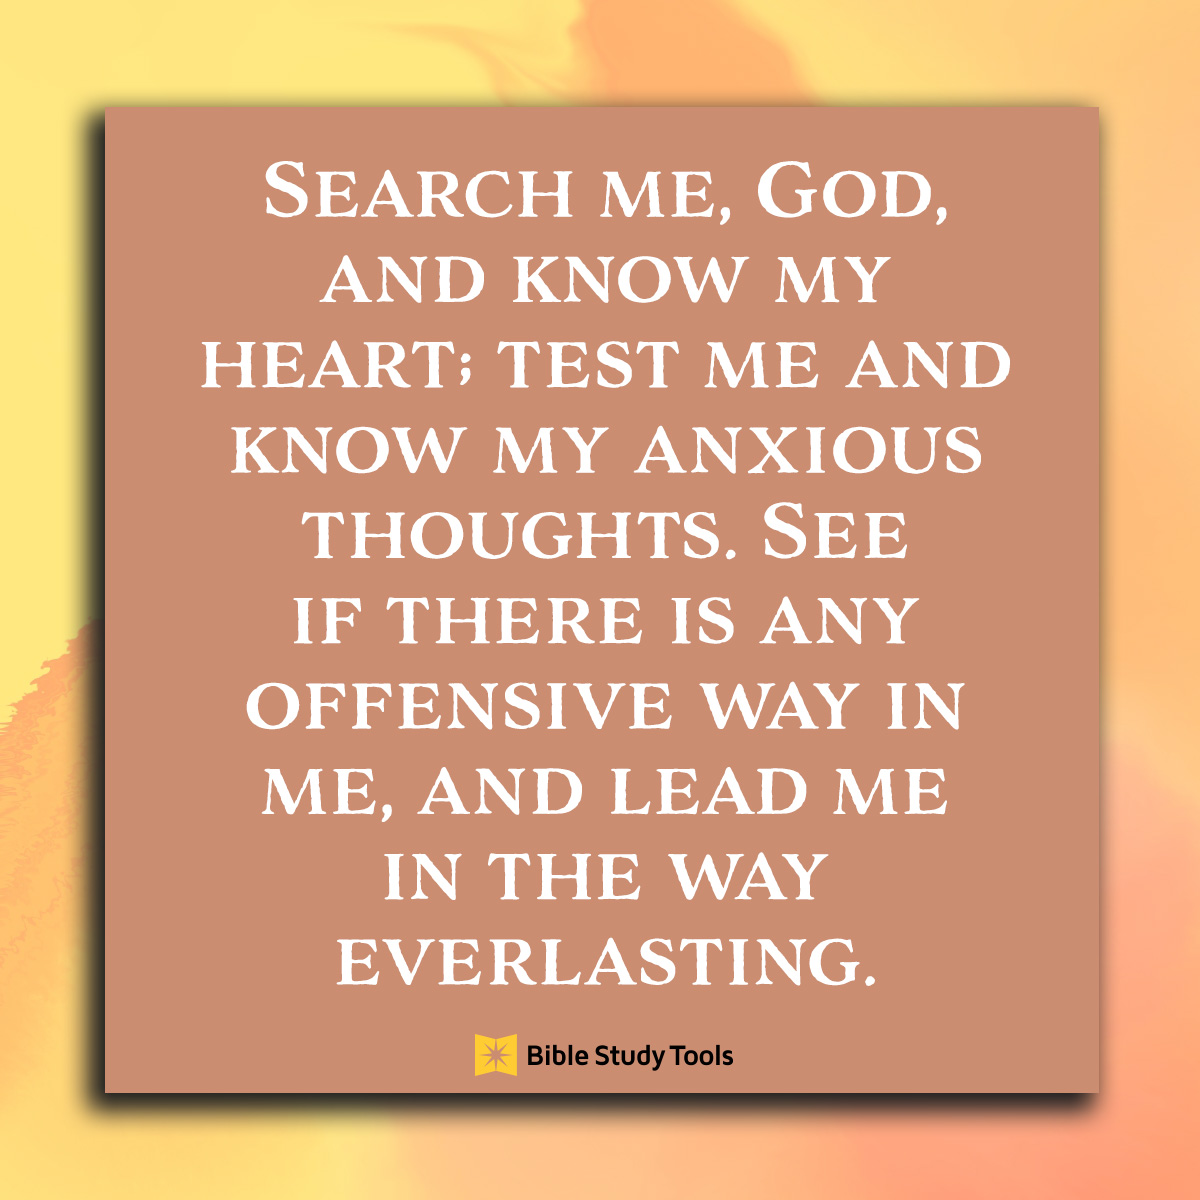 Search me O Lord, inspirational image